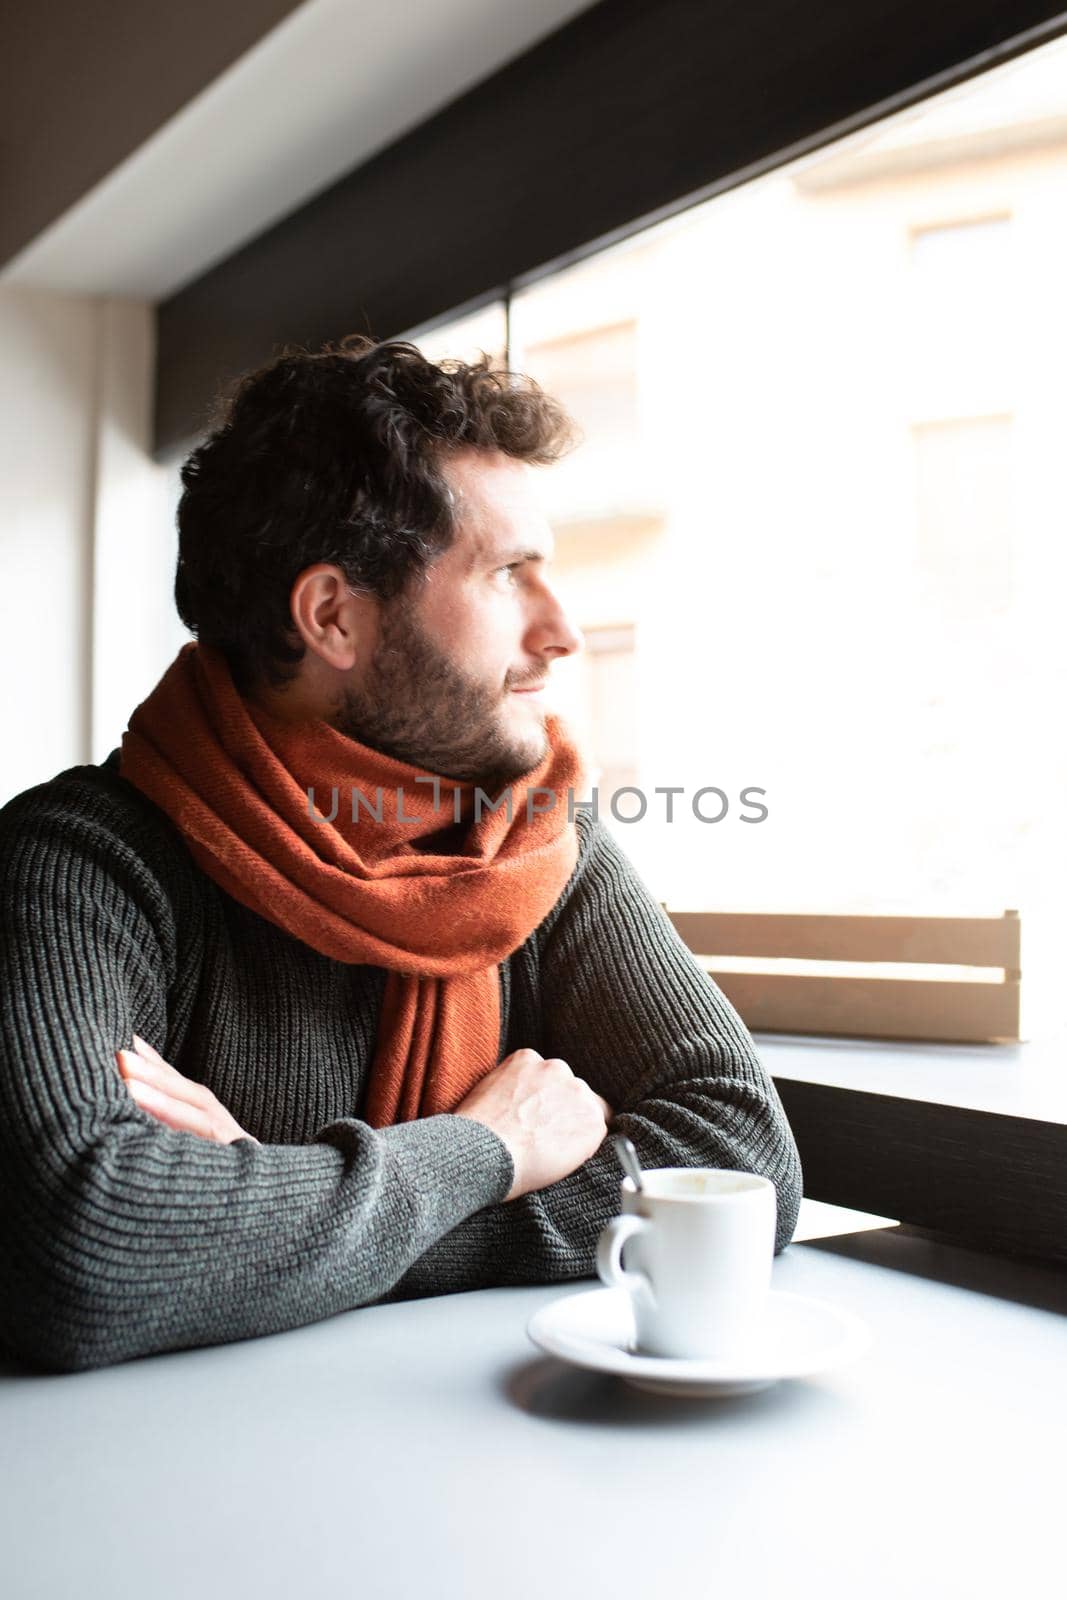 Pensive young man looking out the window, enjoying early morning in coffee shop. Vertical image. Lifestyle.